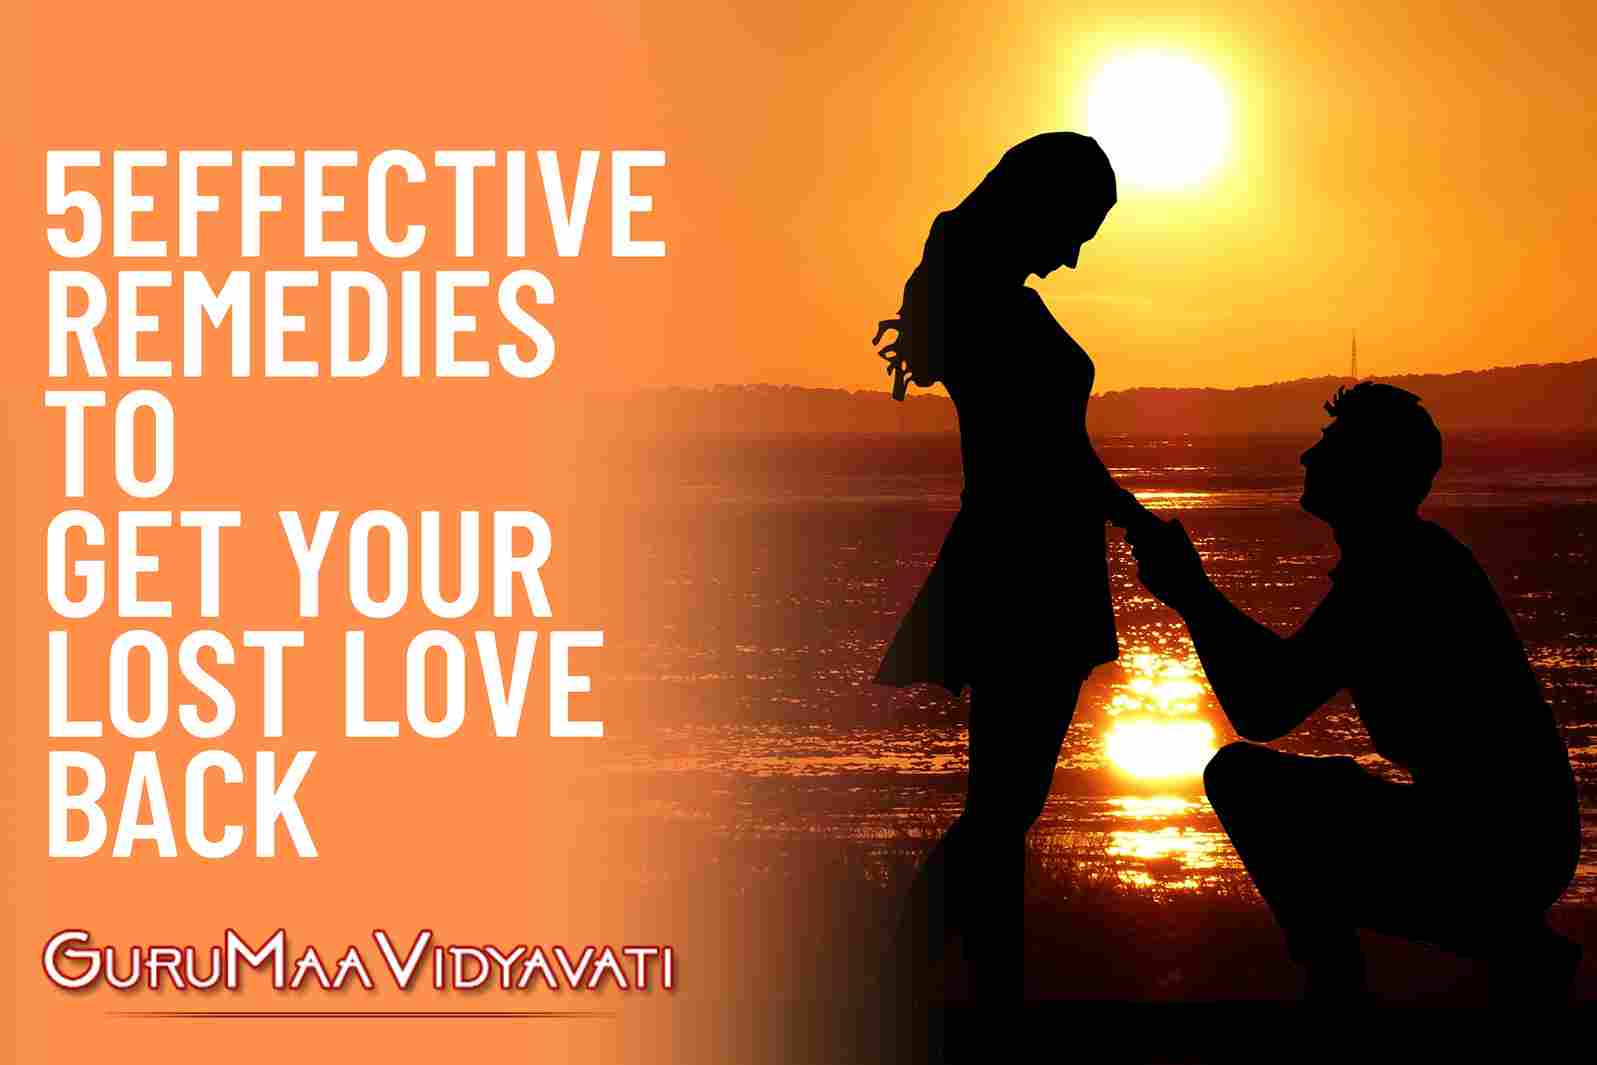 5 Effective Remedies to Get Your Lost Love Back